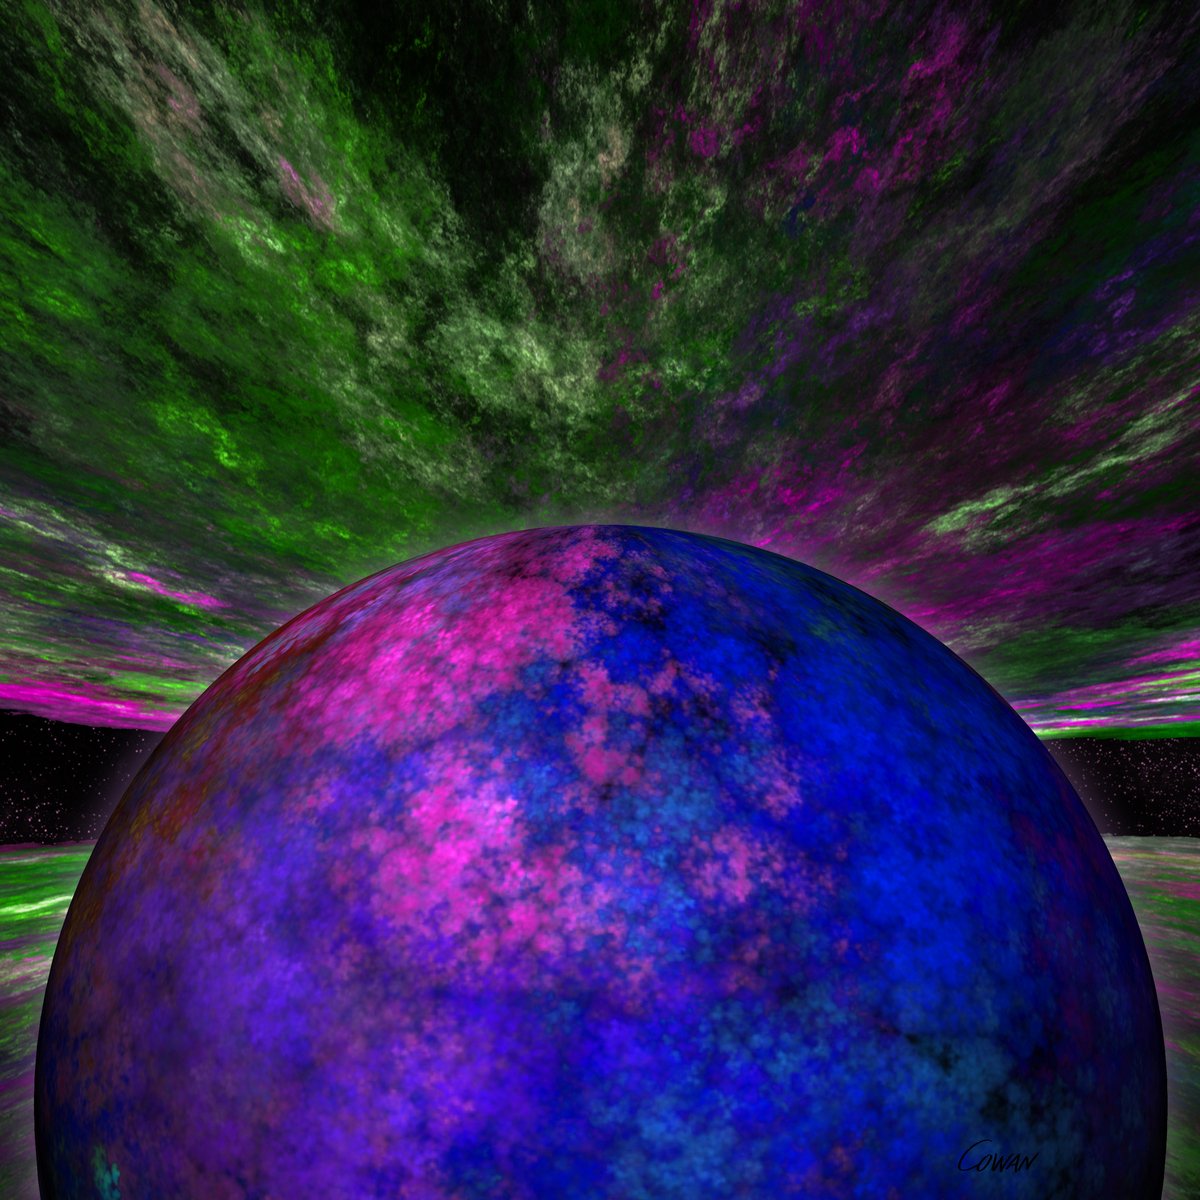 a planet is shown with colored clouds and stars